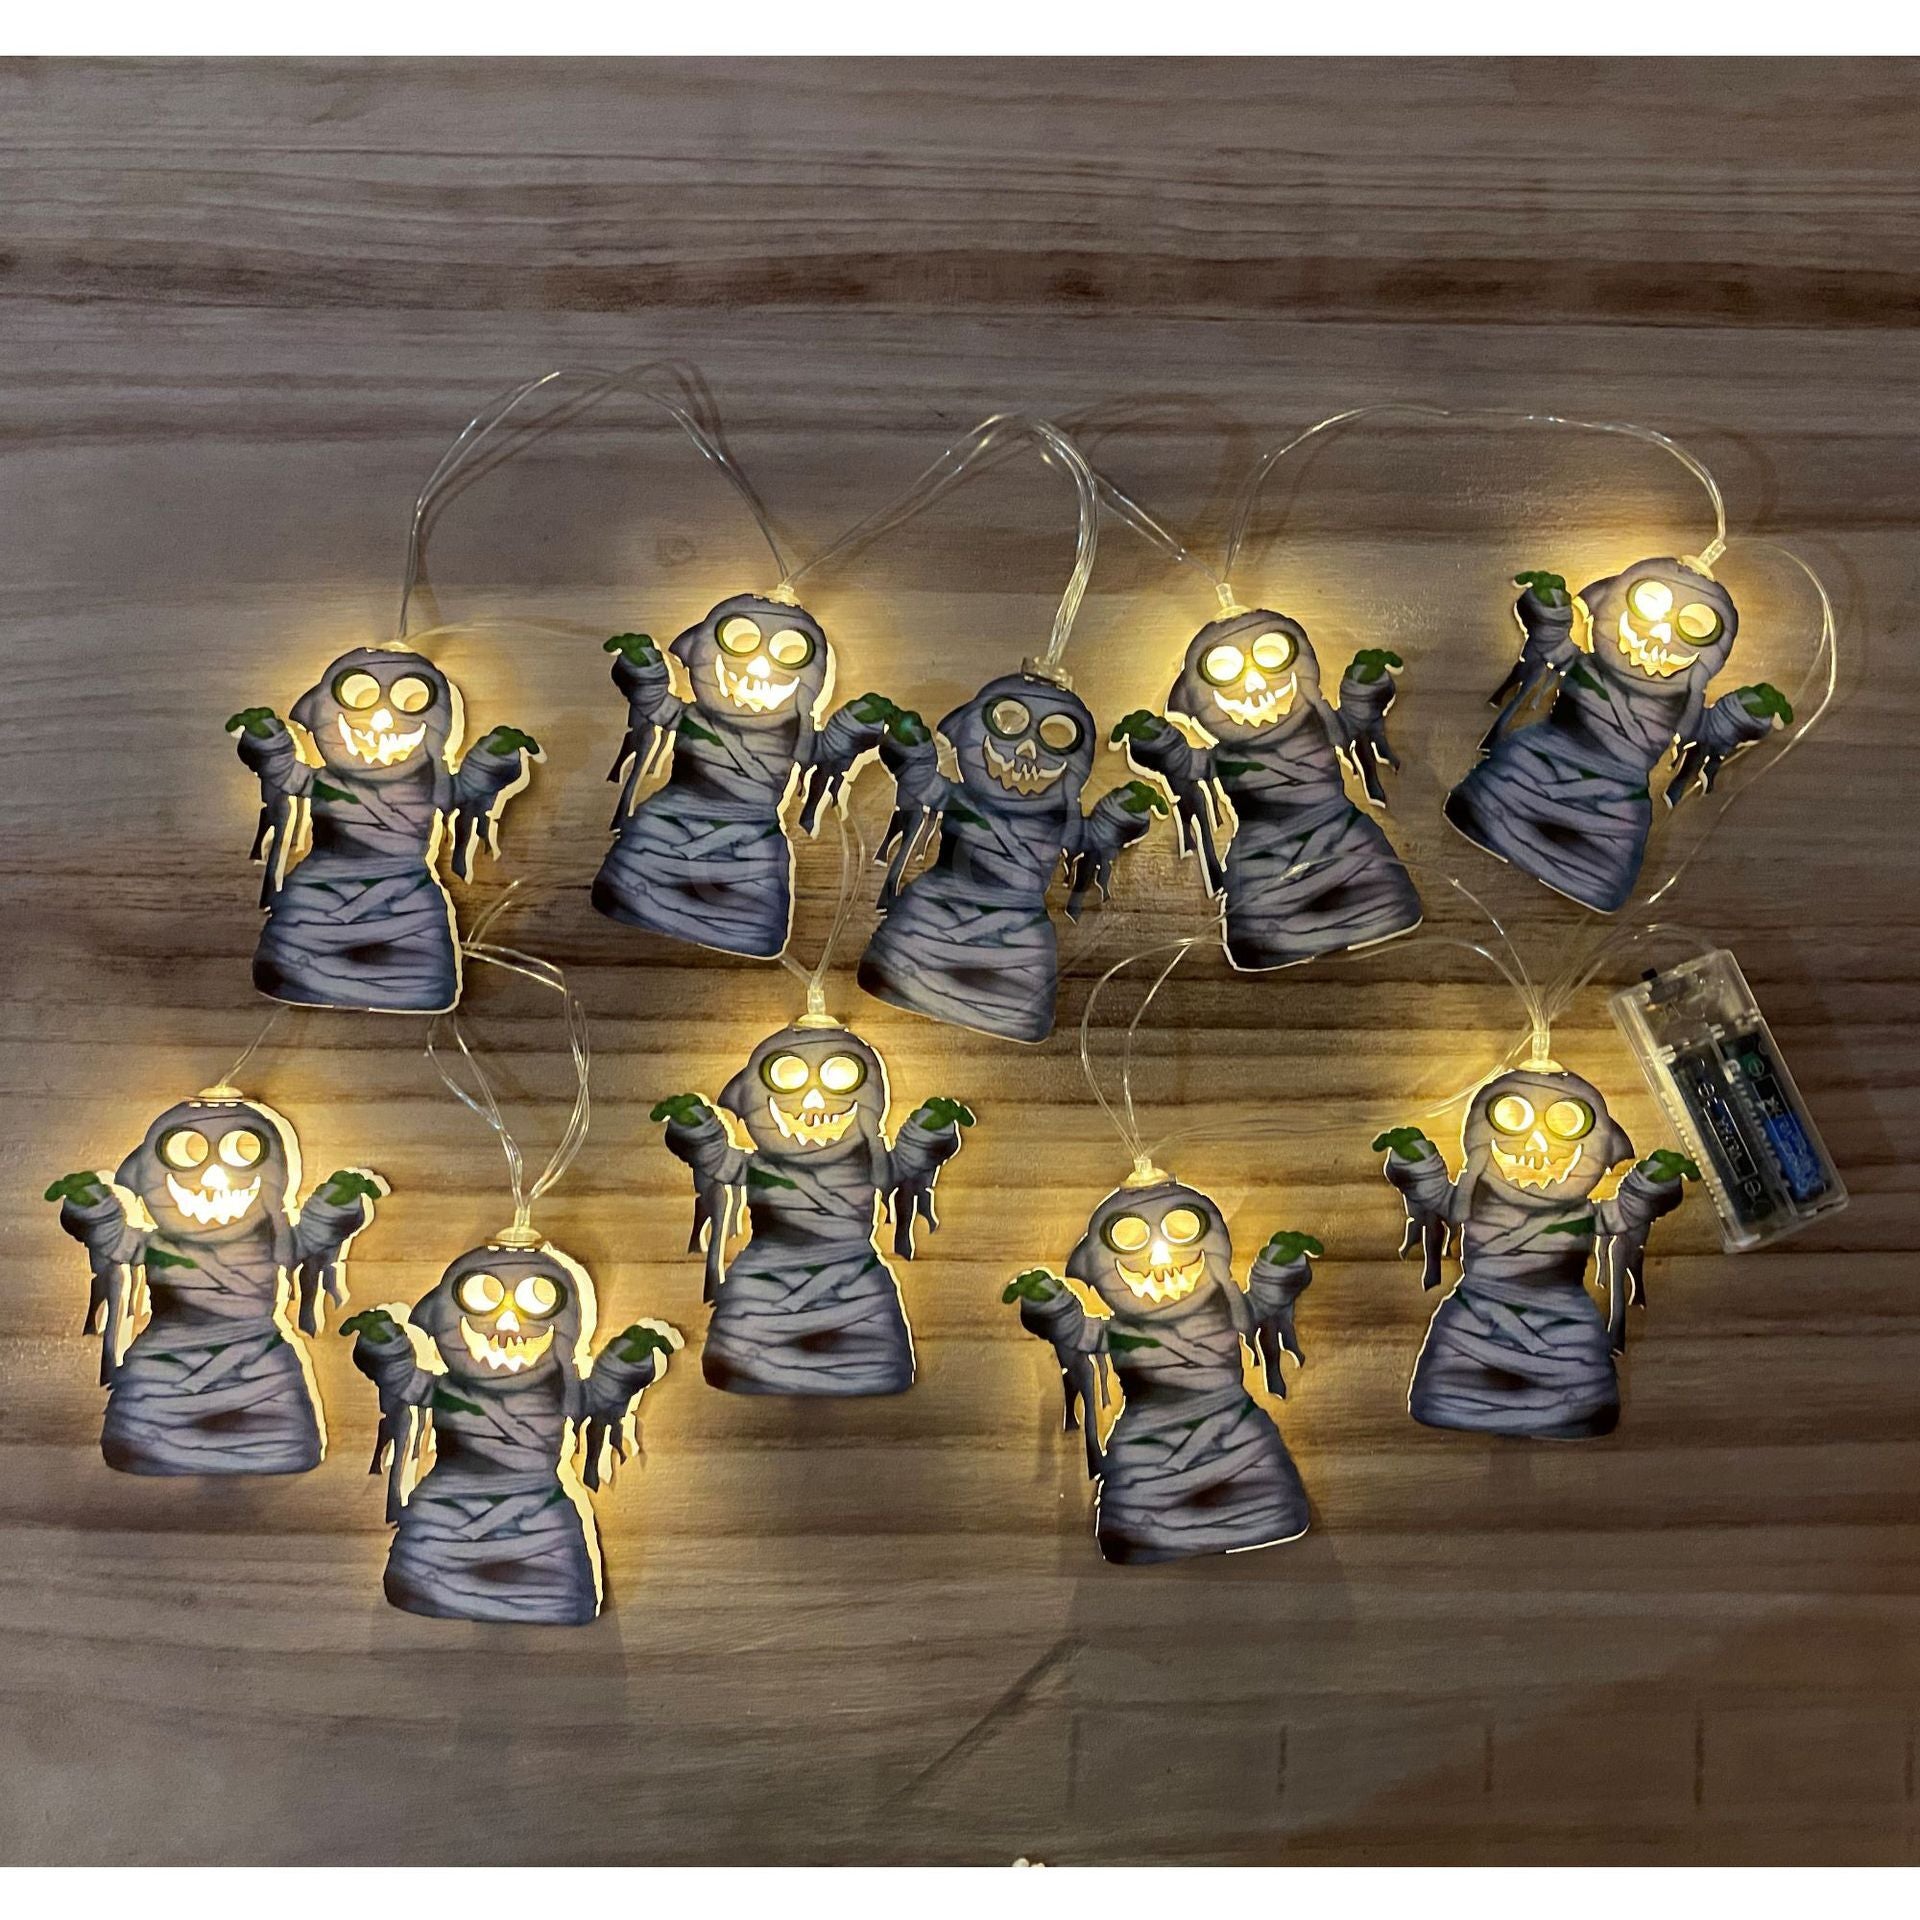 Battery Operated Mini Halloween Themed String Lights